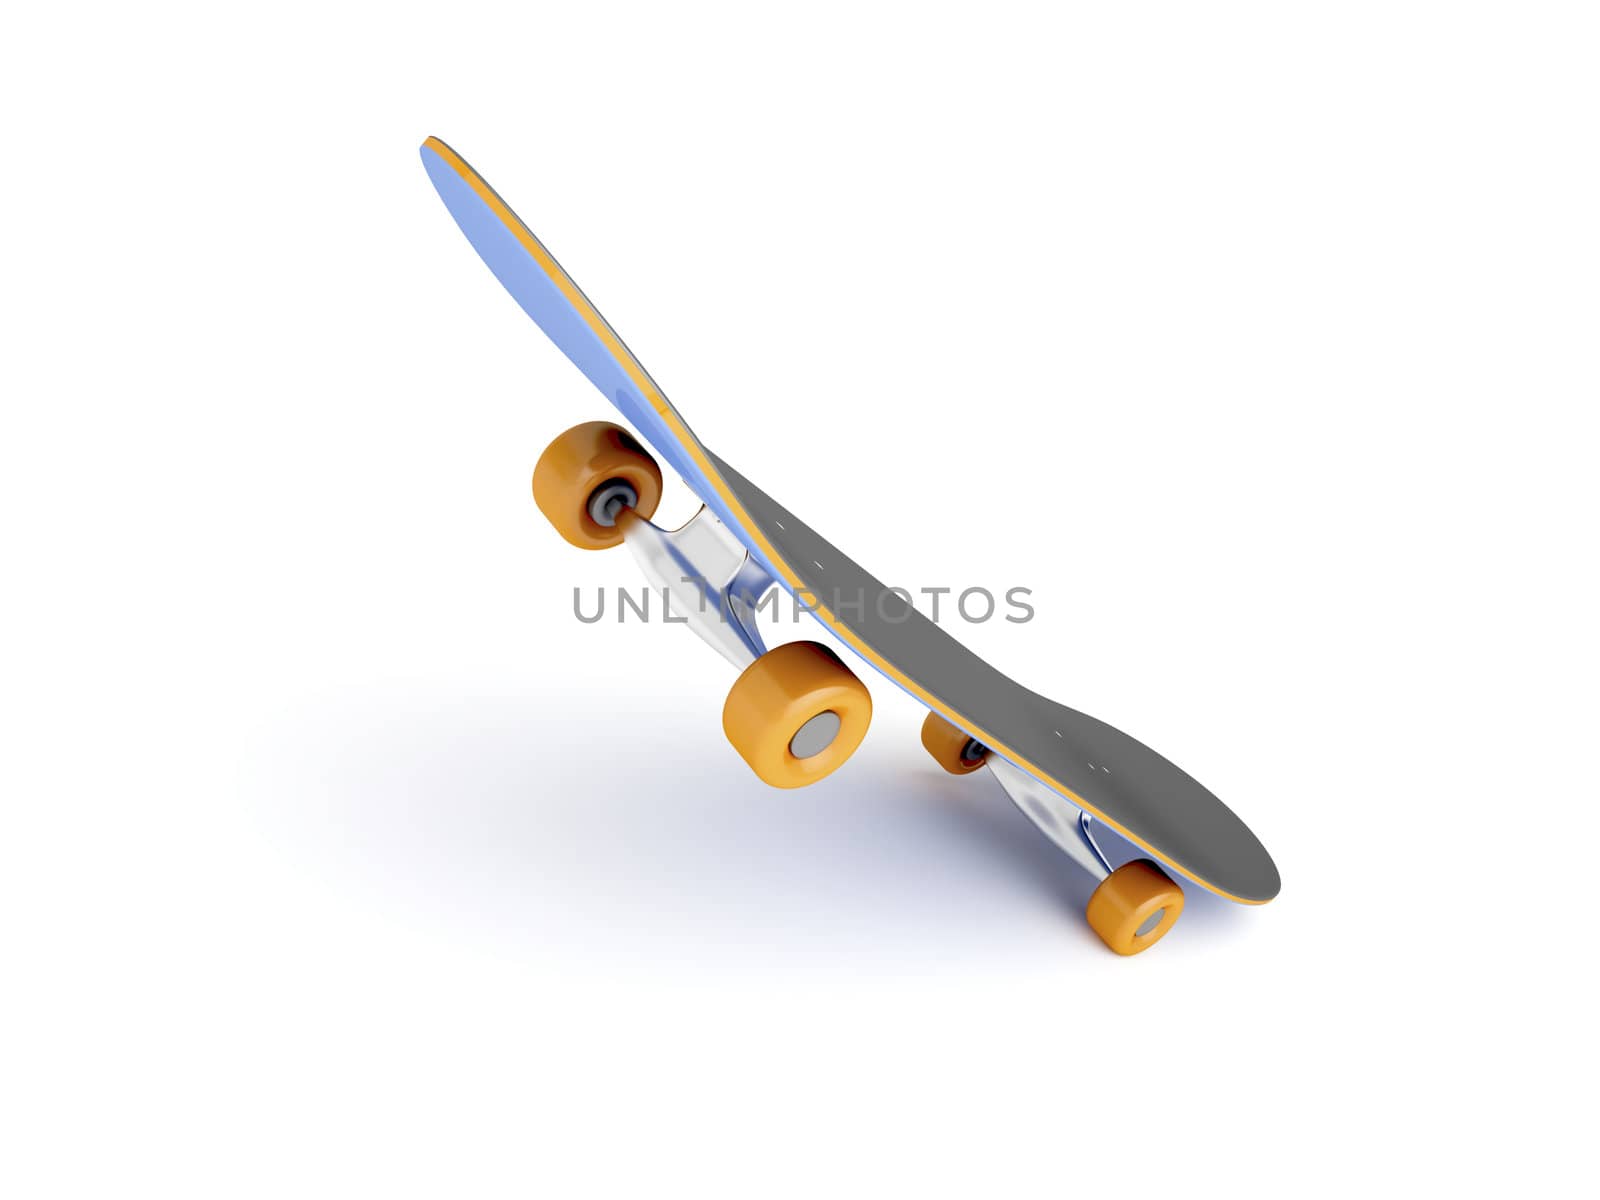 Skateboard in jumping position on white background